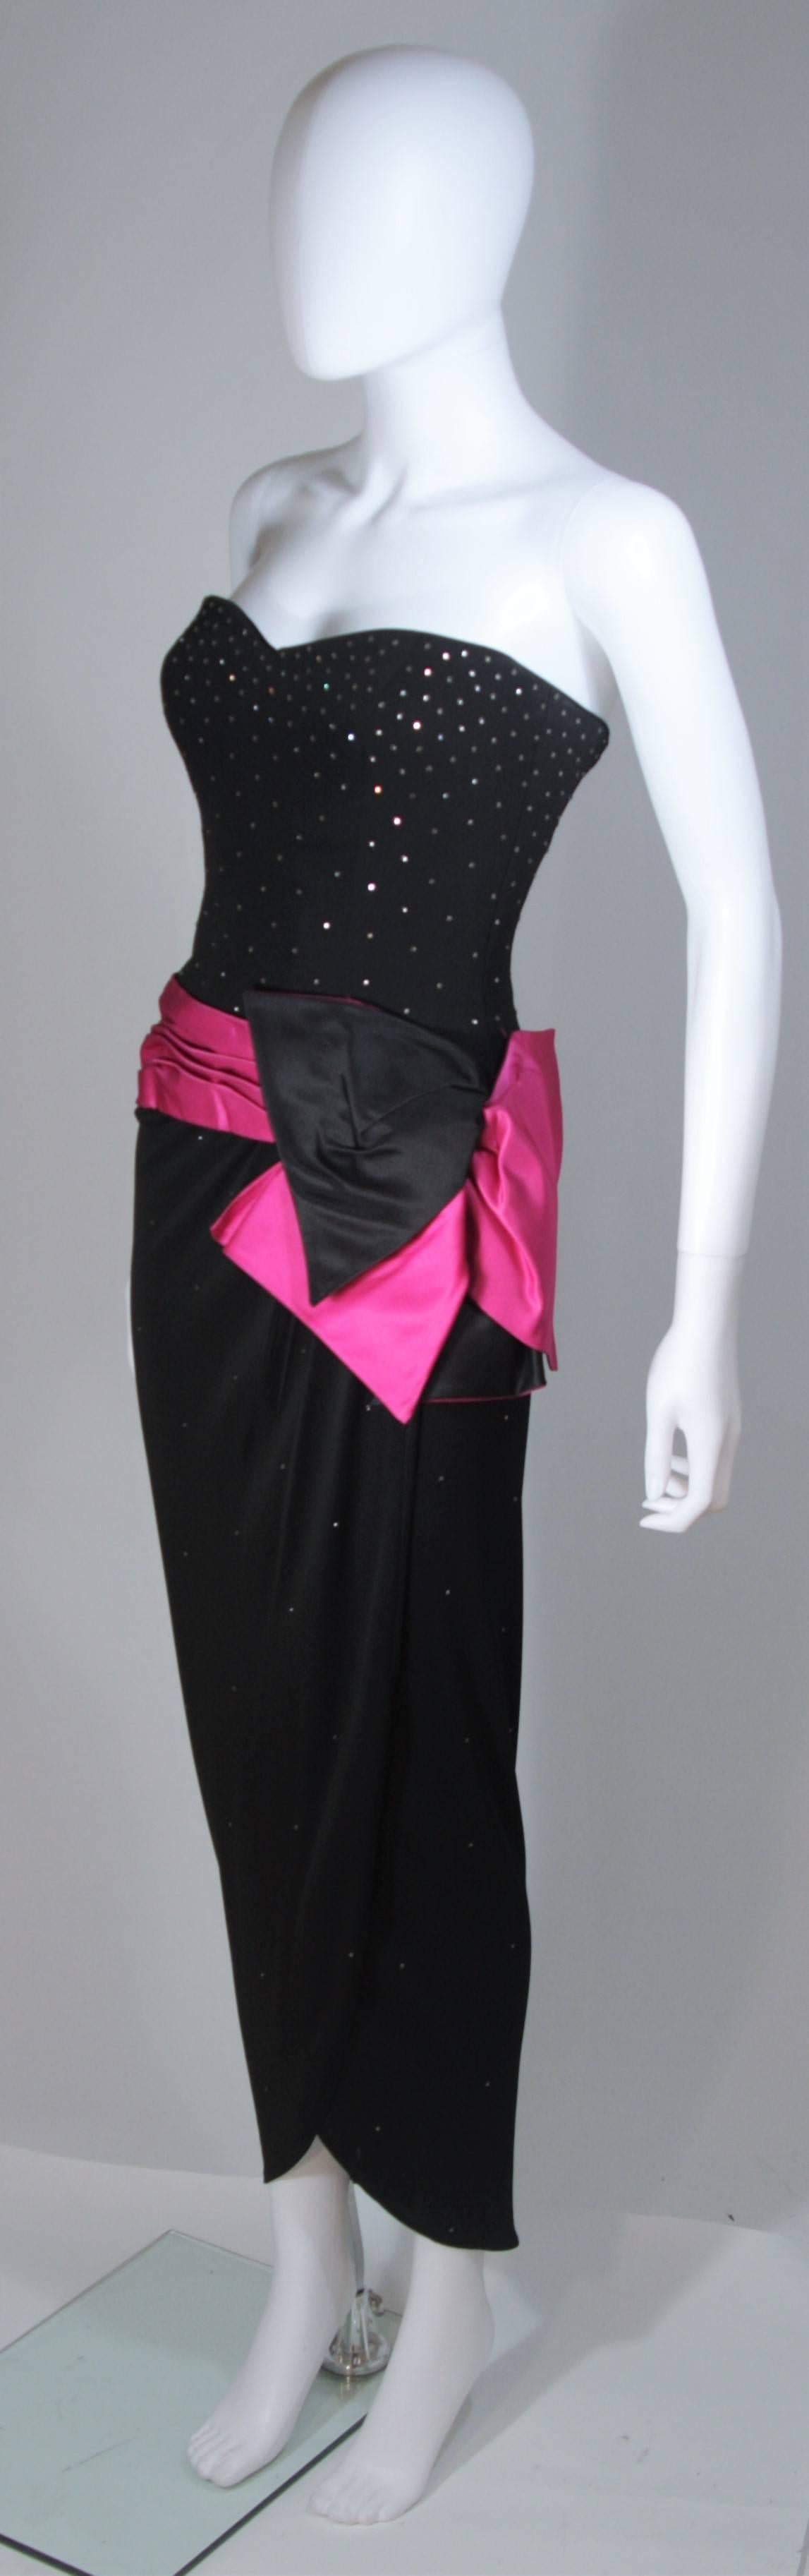 TRACEY MILLS 1980's Black Gown with Magenta Contrast and Large Bow Size 4-6 In Excellent Condition For Sale In Los Angeles, CA